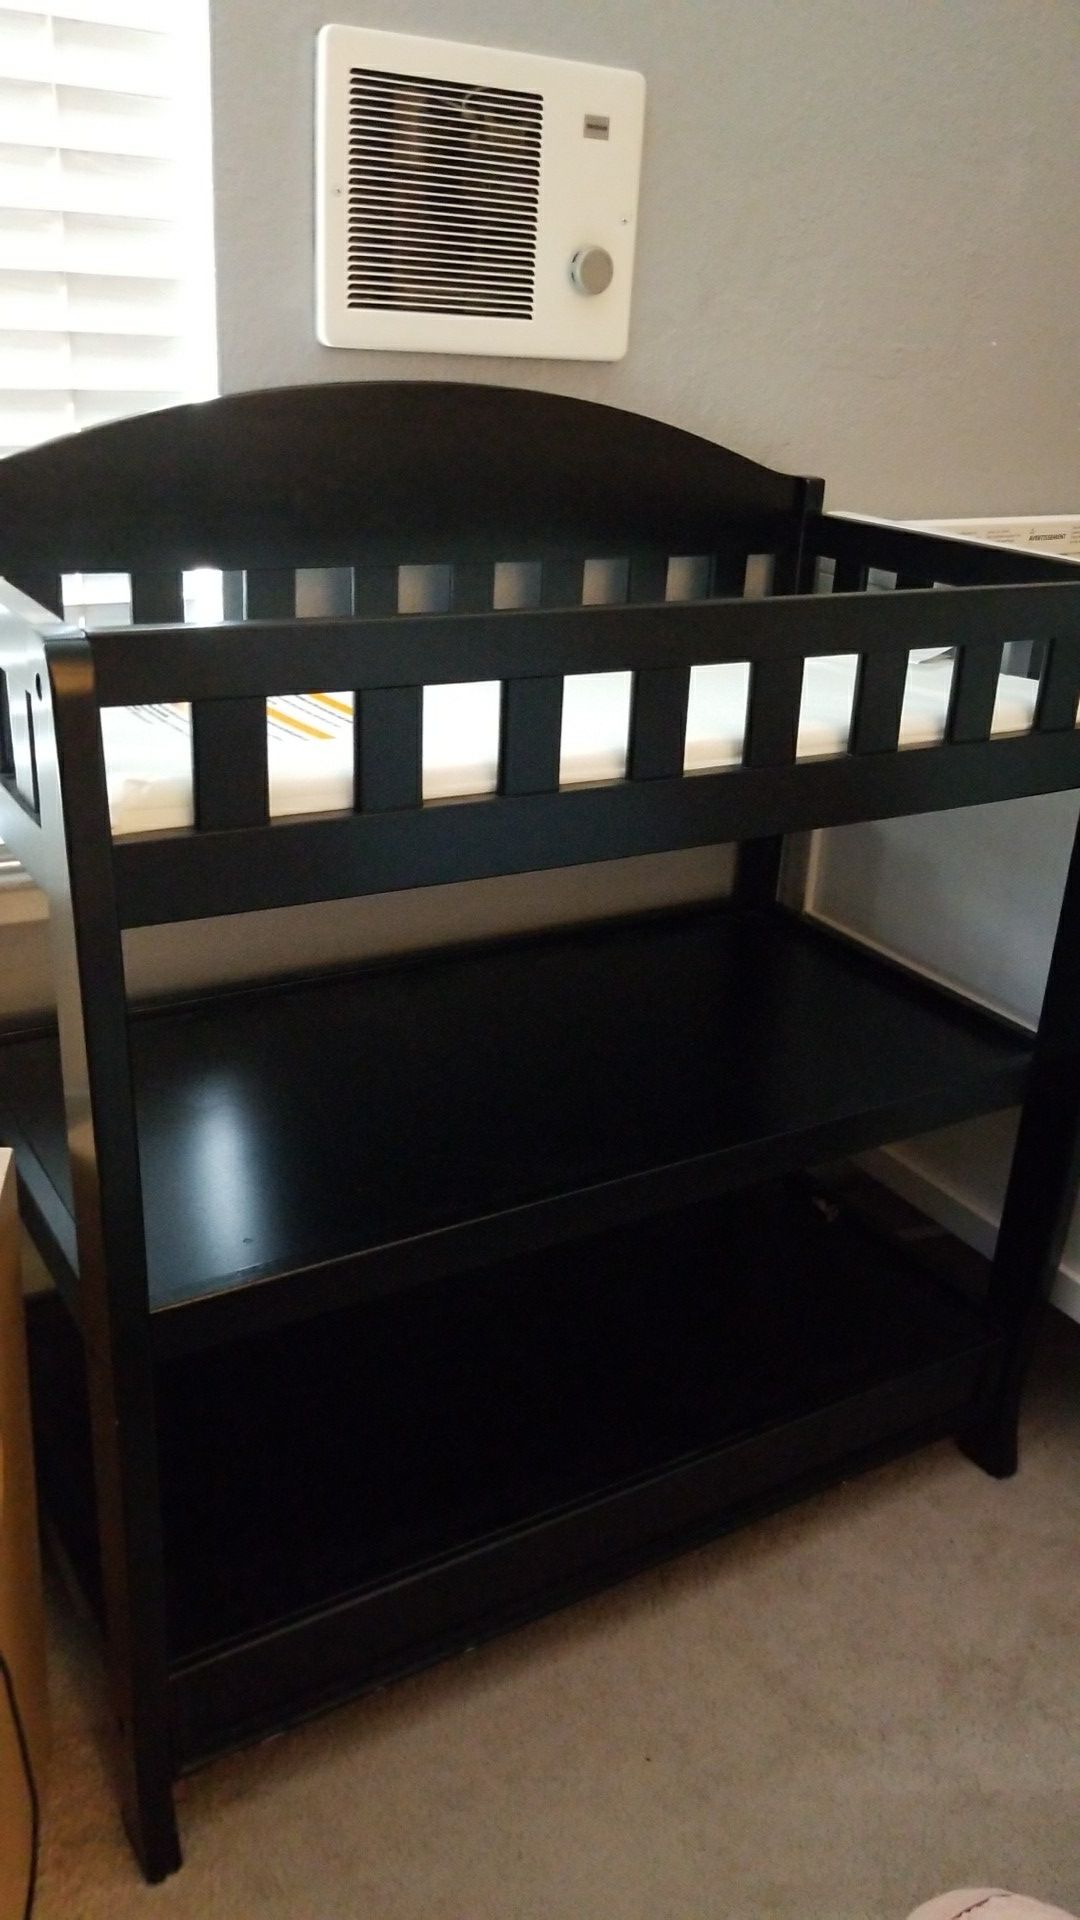 Black changing table in new condition